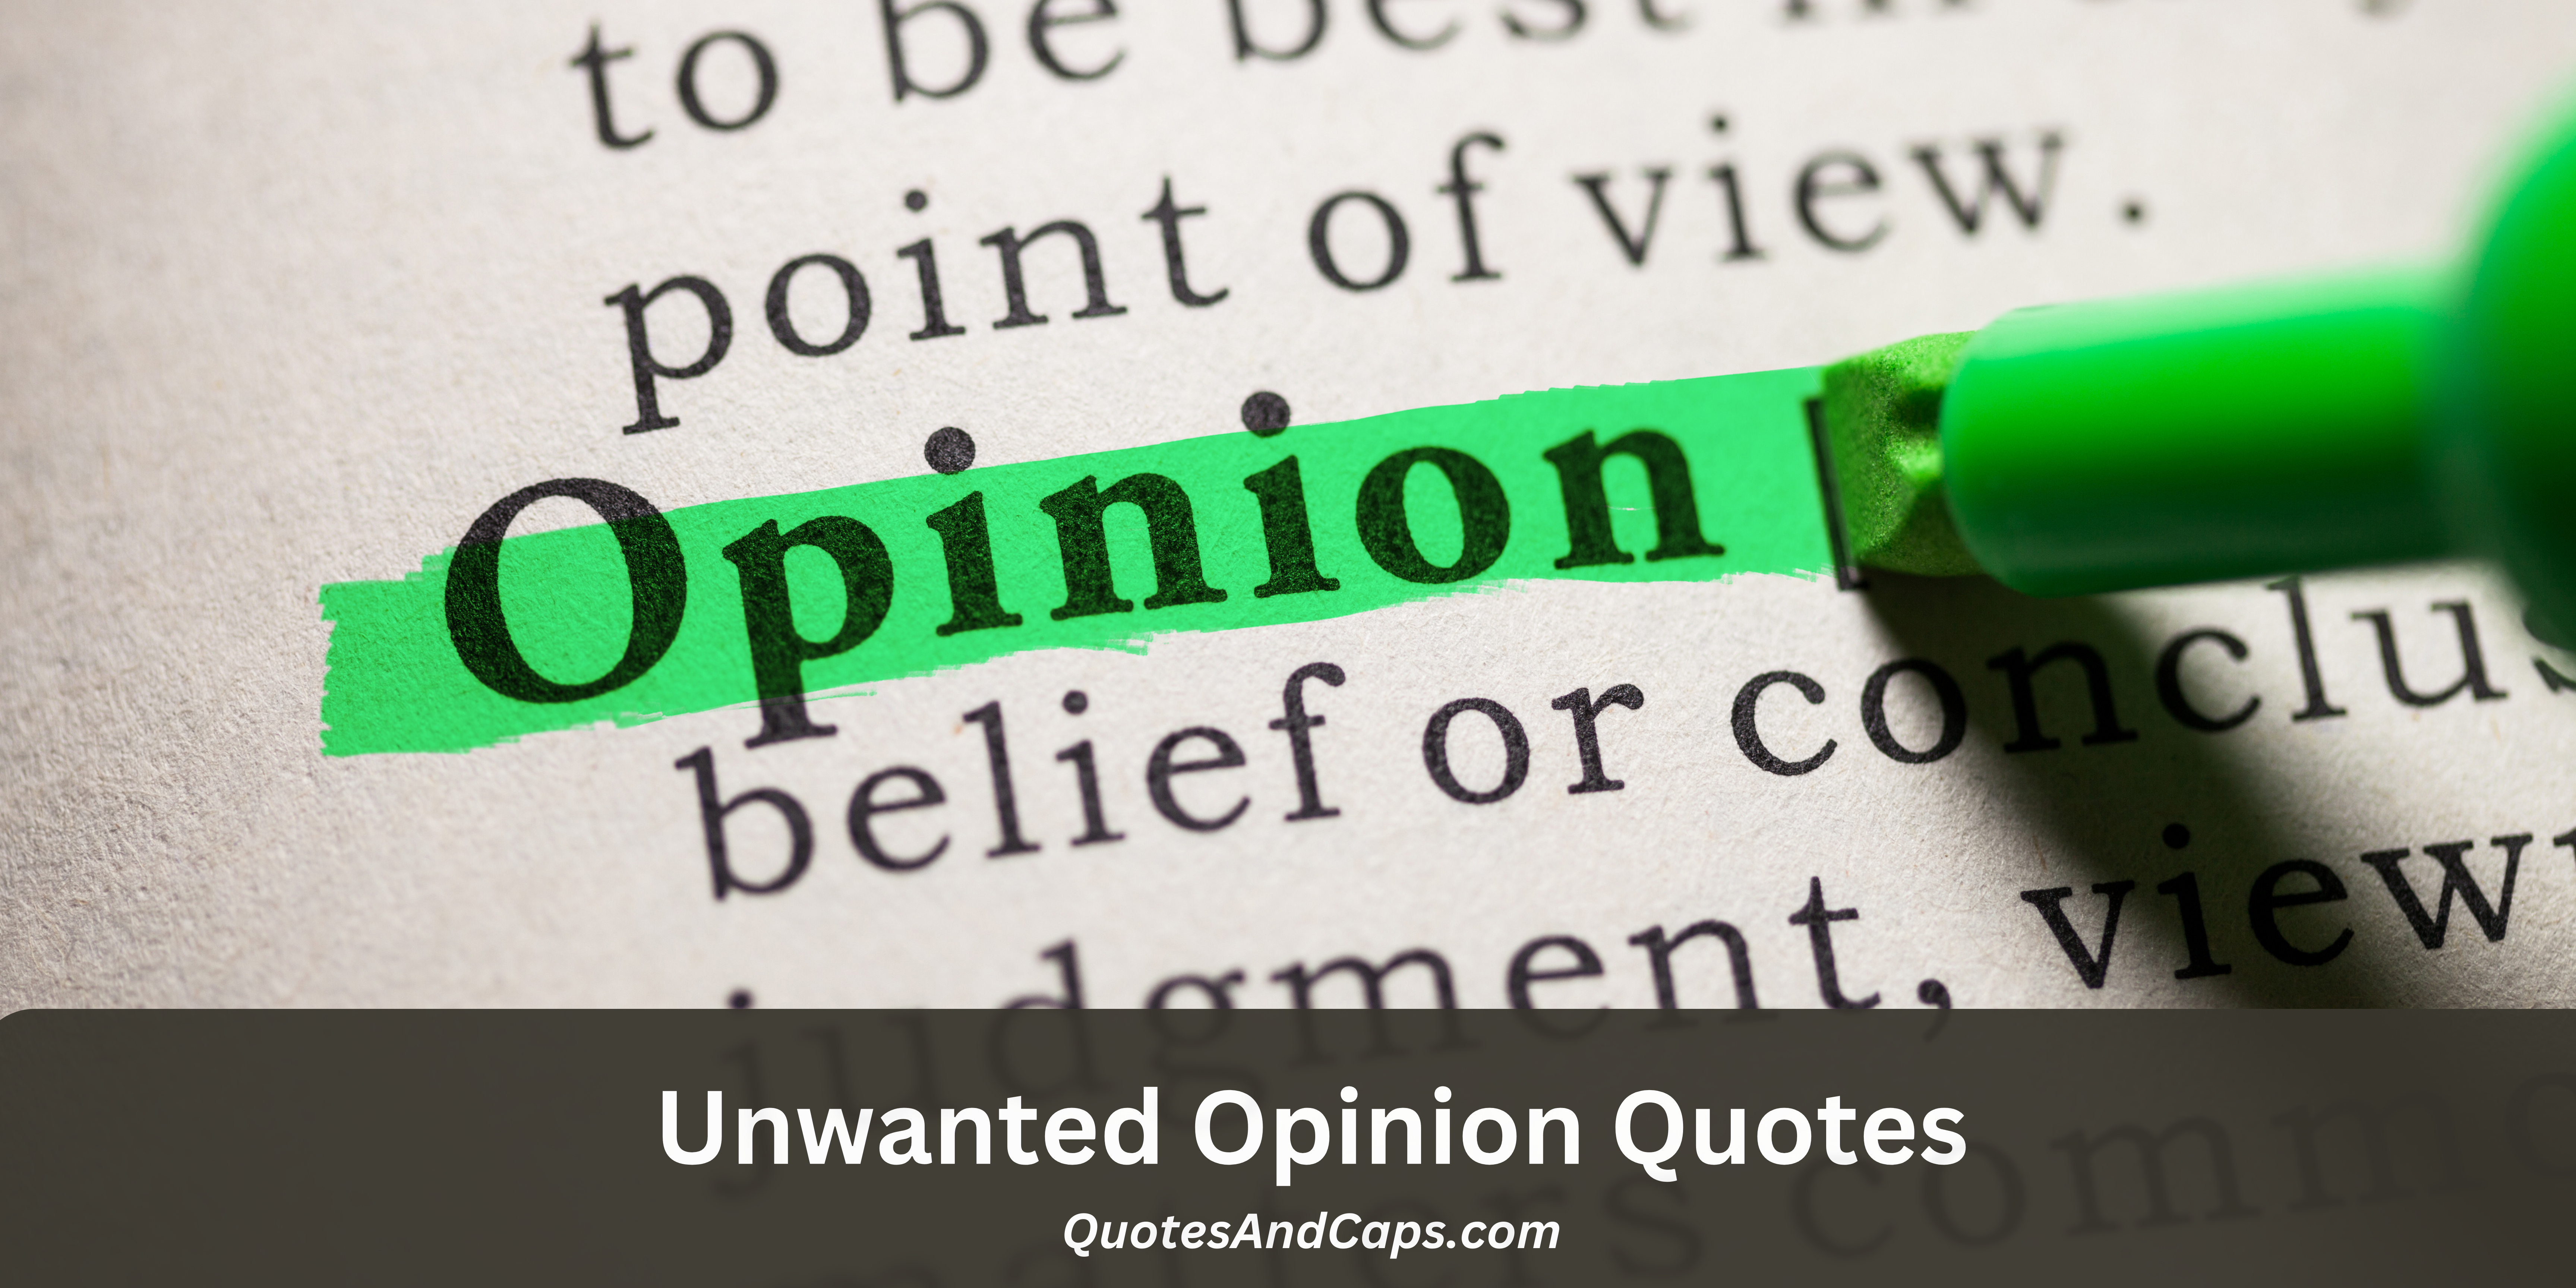 Unwanted Opinion Quotes